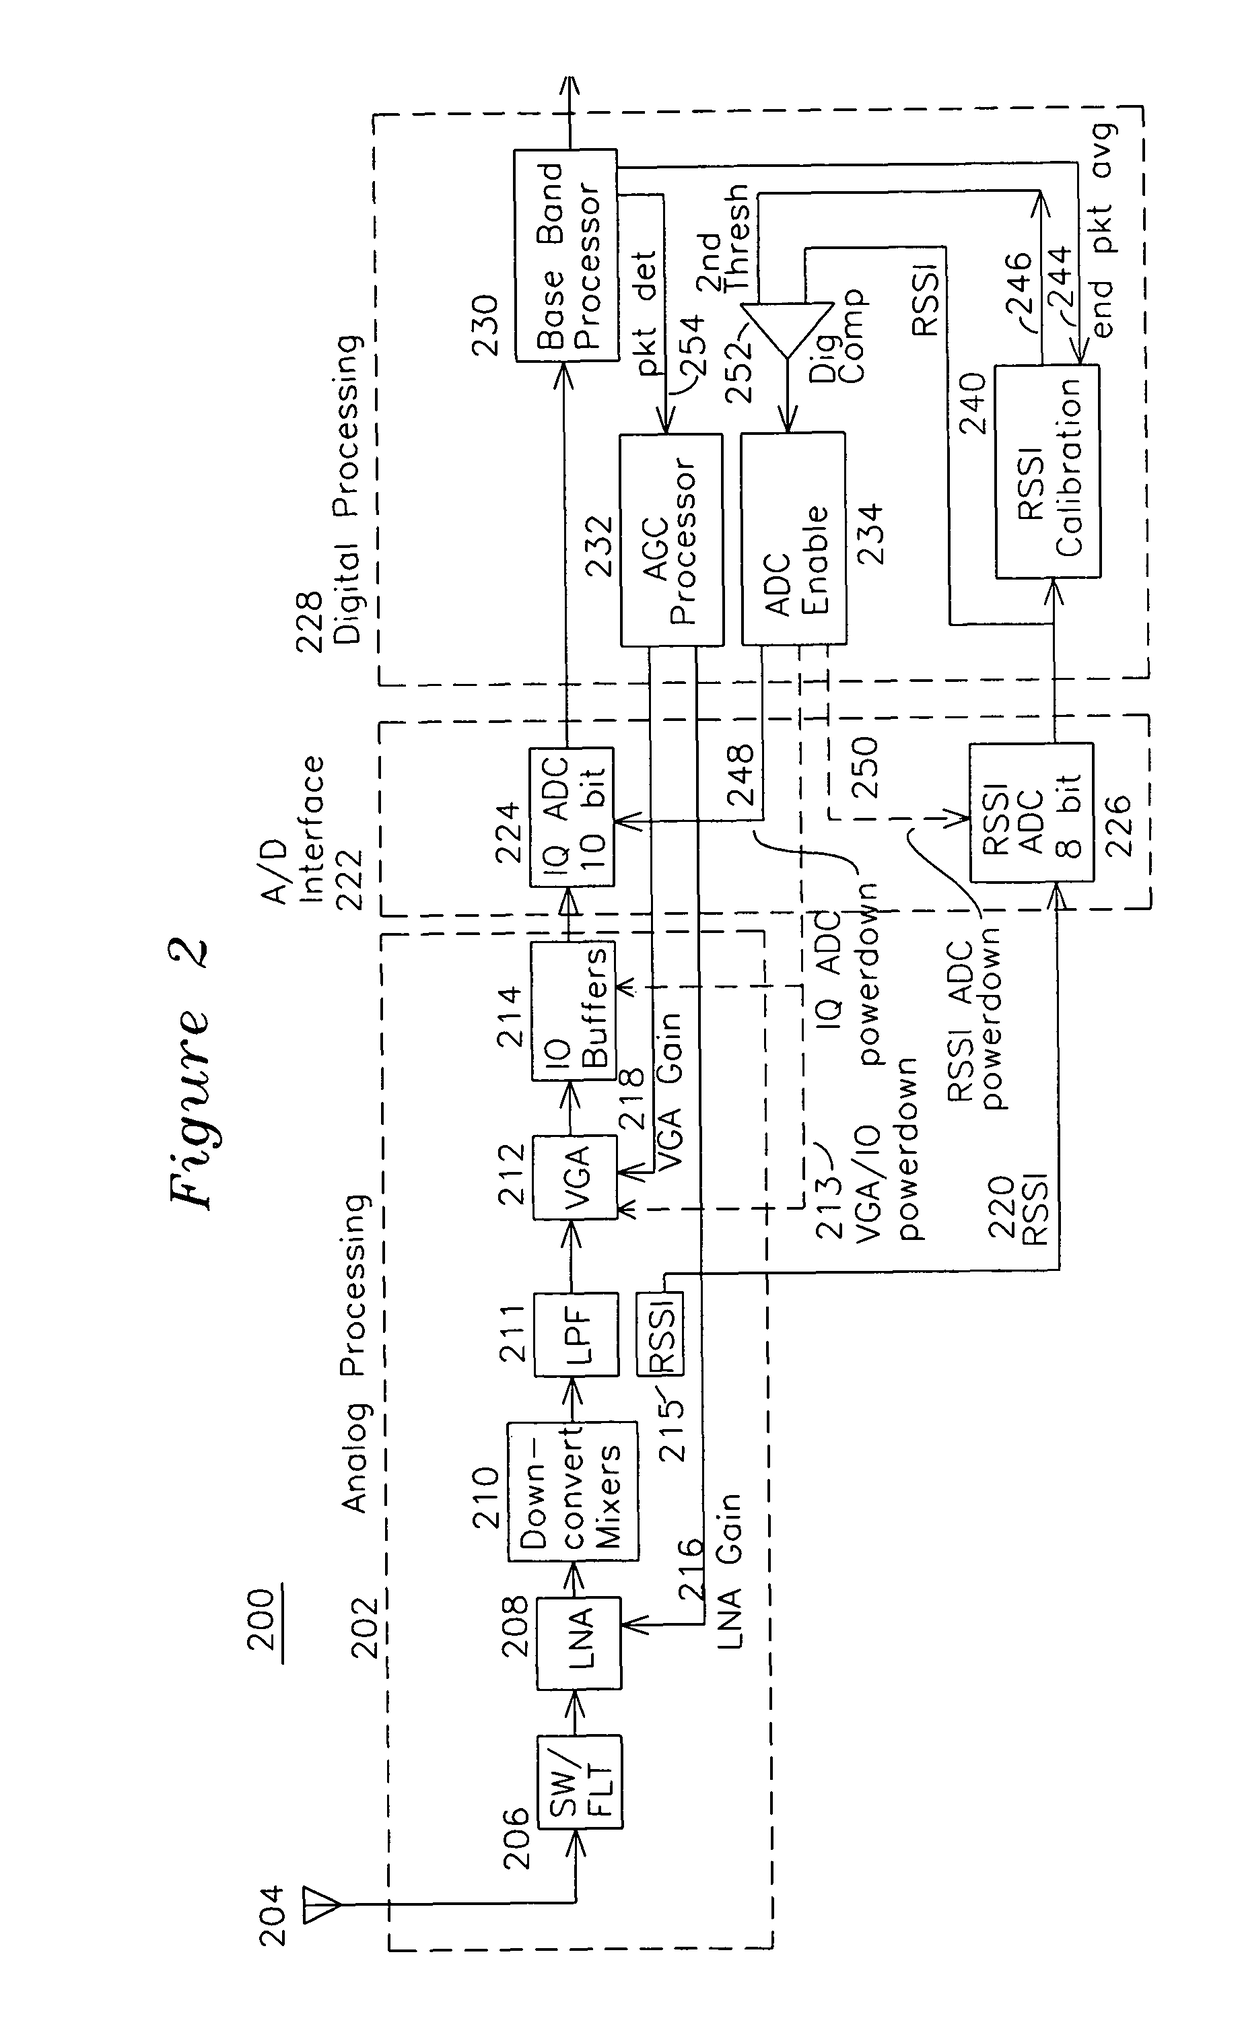 RSSI-based powerdown apparatus and method for a wireless communications system